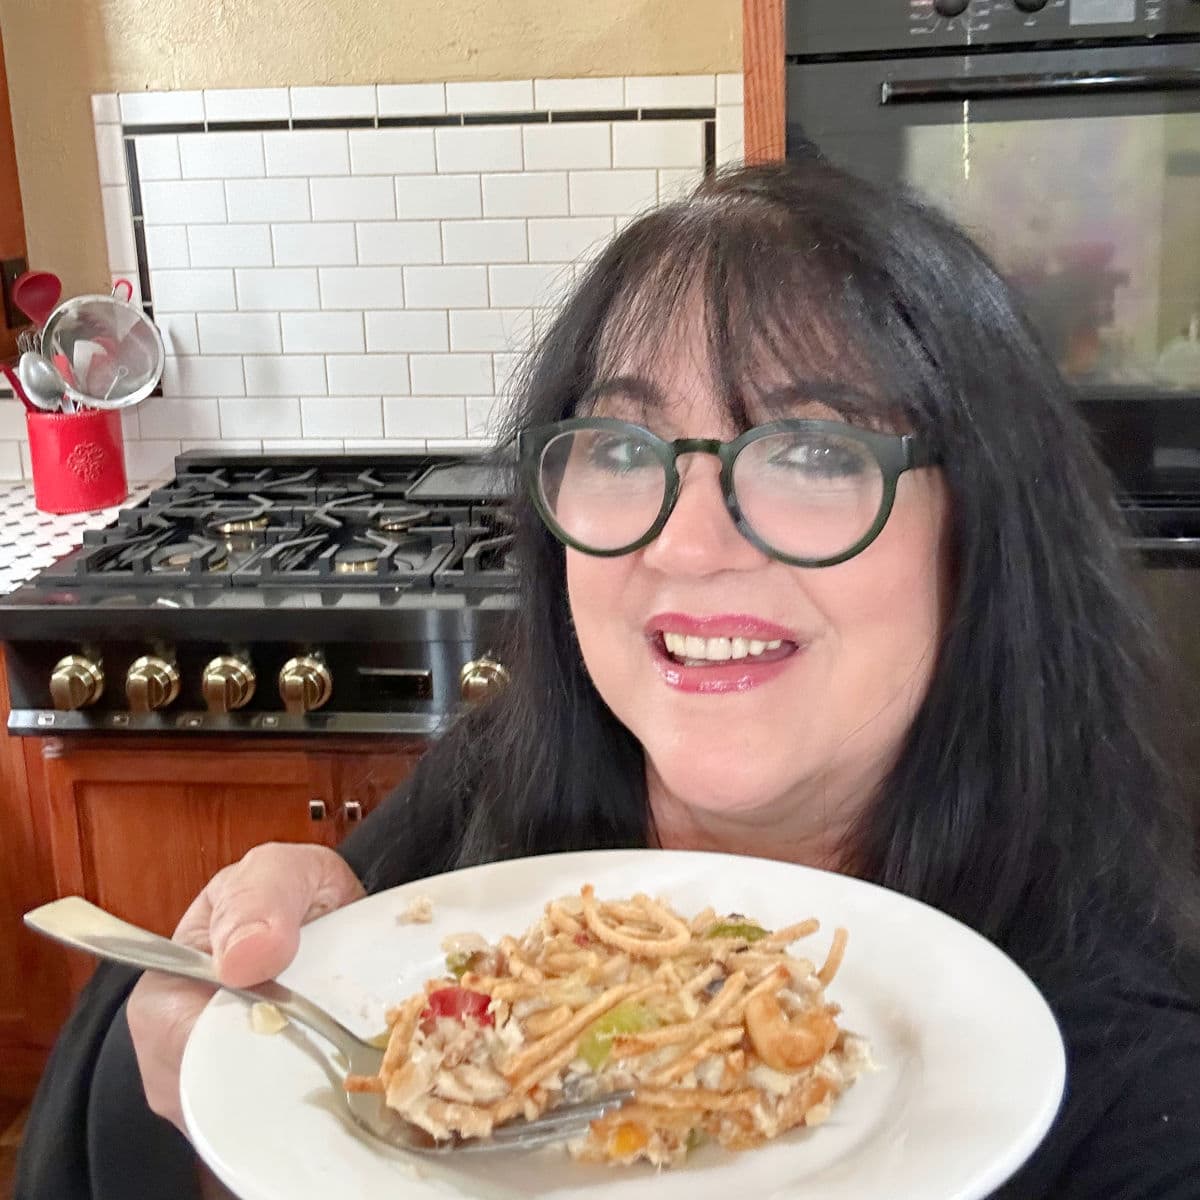 Marye Audet, author and recipe developer, holding a dish of her mom's chopstick tuna salad.